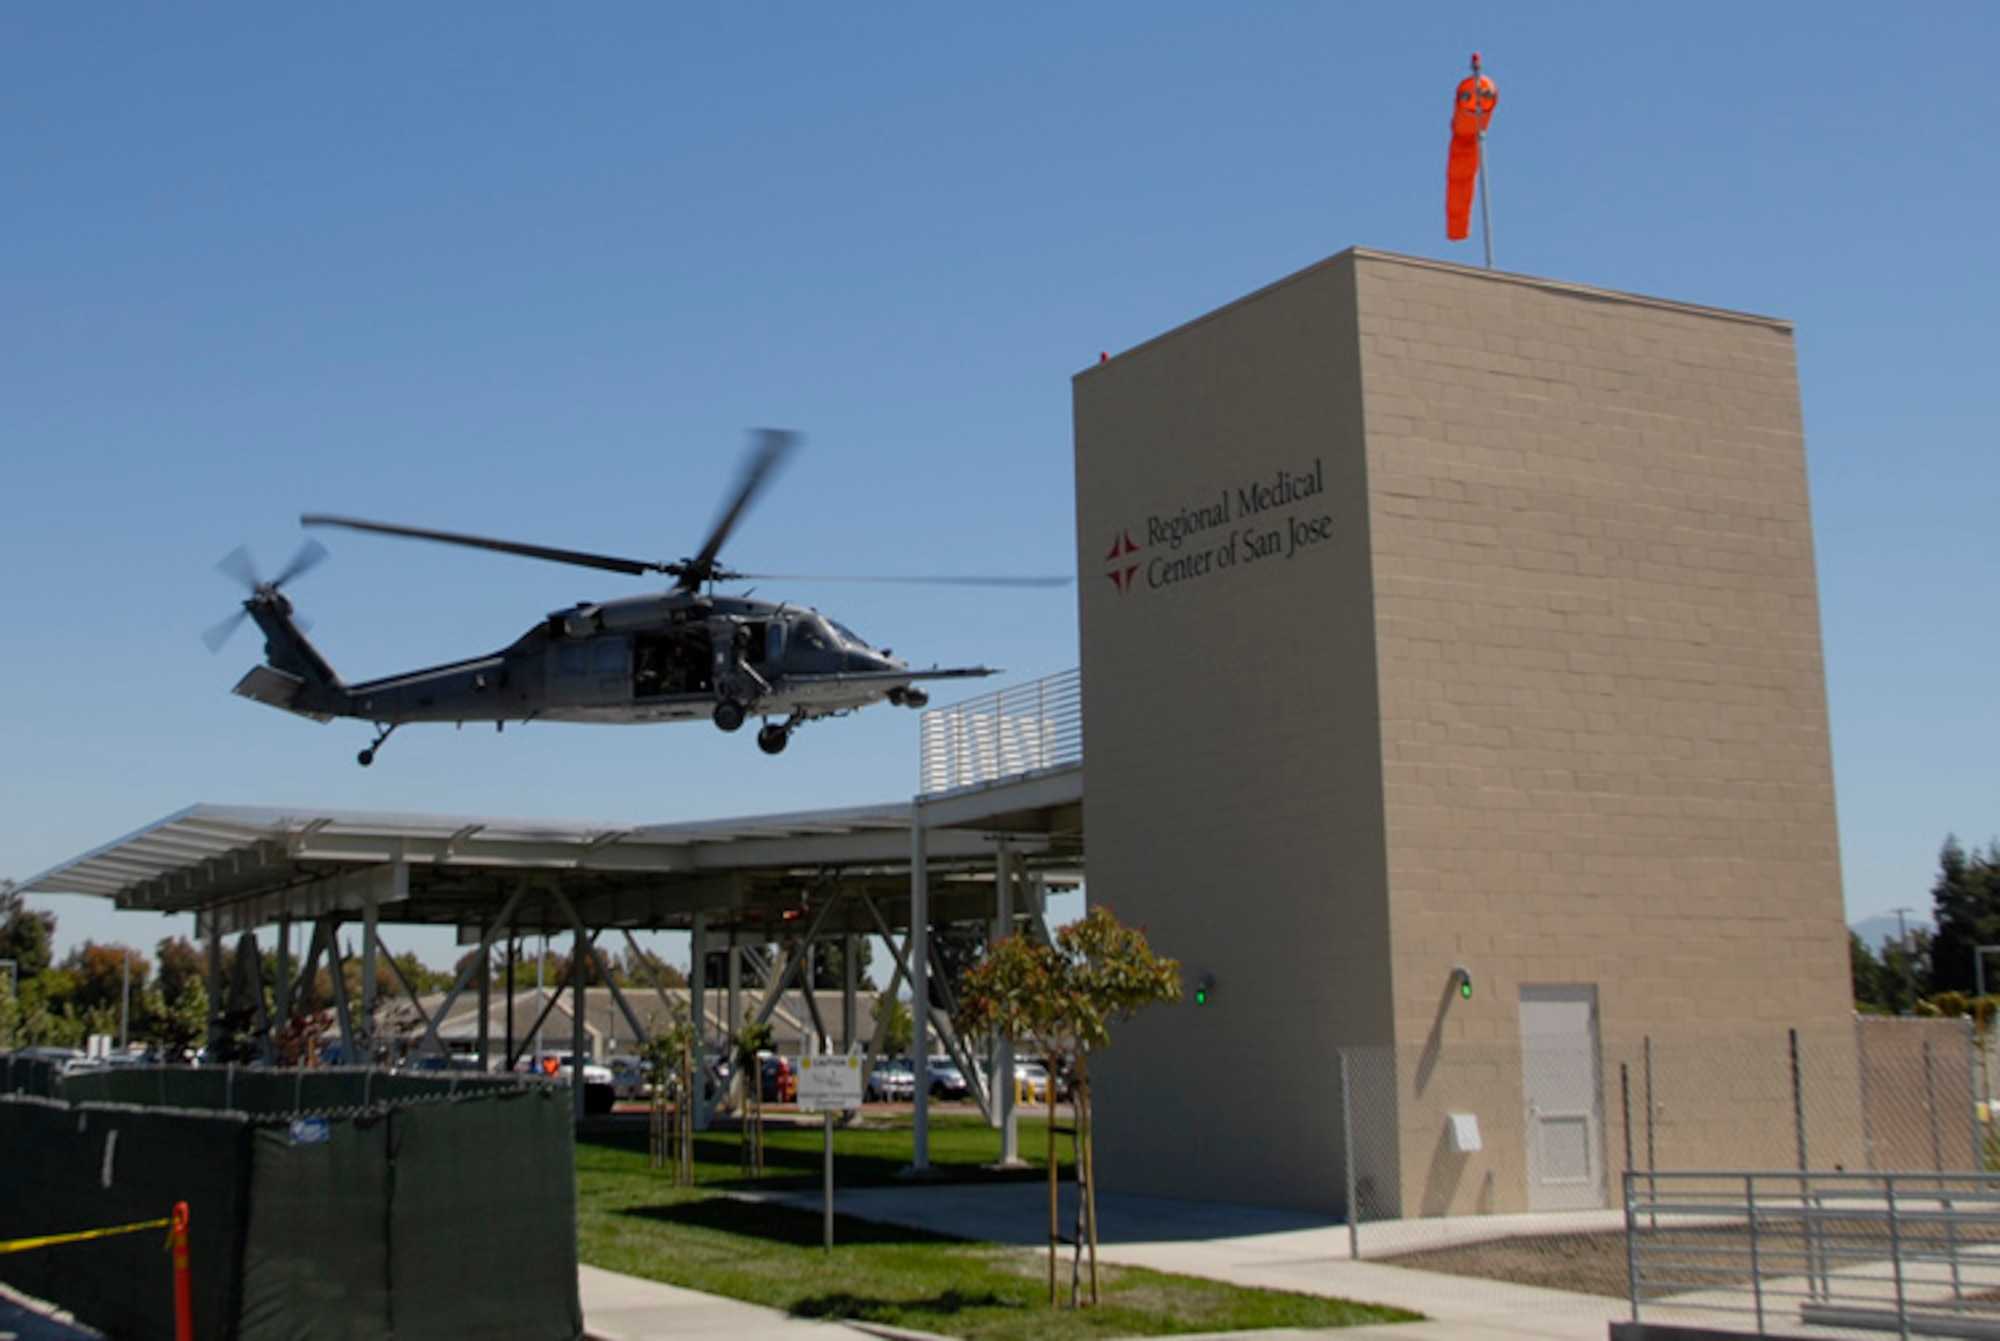 An HH-60G Pave Hawk from the 129th Rescue Wing, Moffett Federal Airfield, California hovers at the new helipad at the San Jose Regional Medical Center on June 9, 2008.  The pad has been constructed to withstand the weight of the Pave Hawk. (U.S. Air Force photo by Staff Sgt. Andrew Hughan)